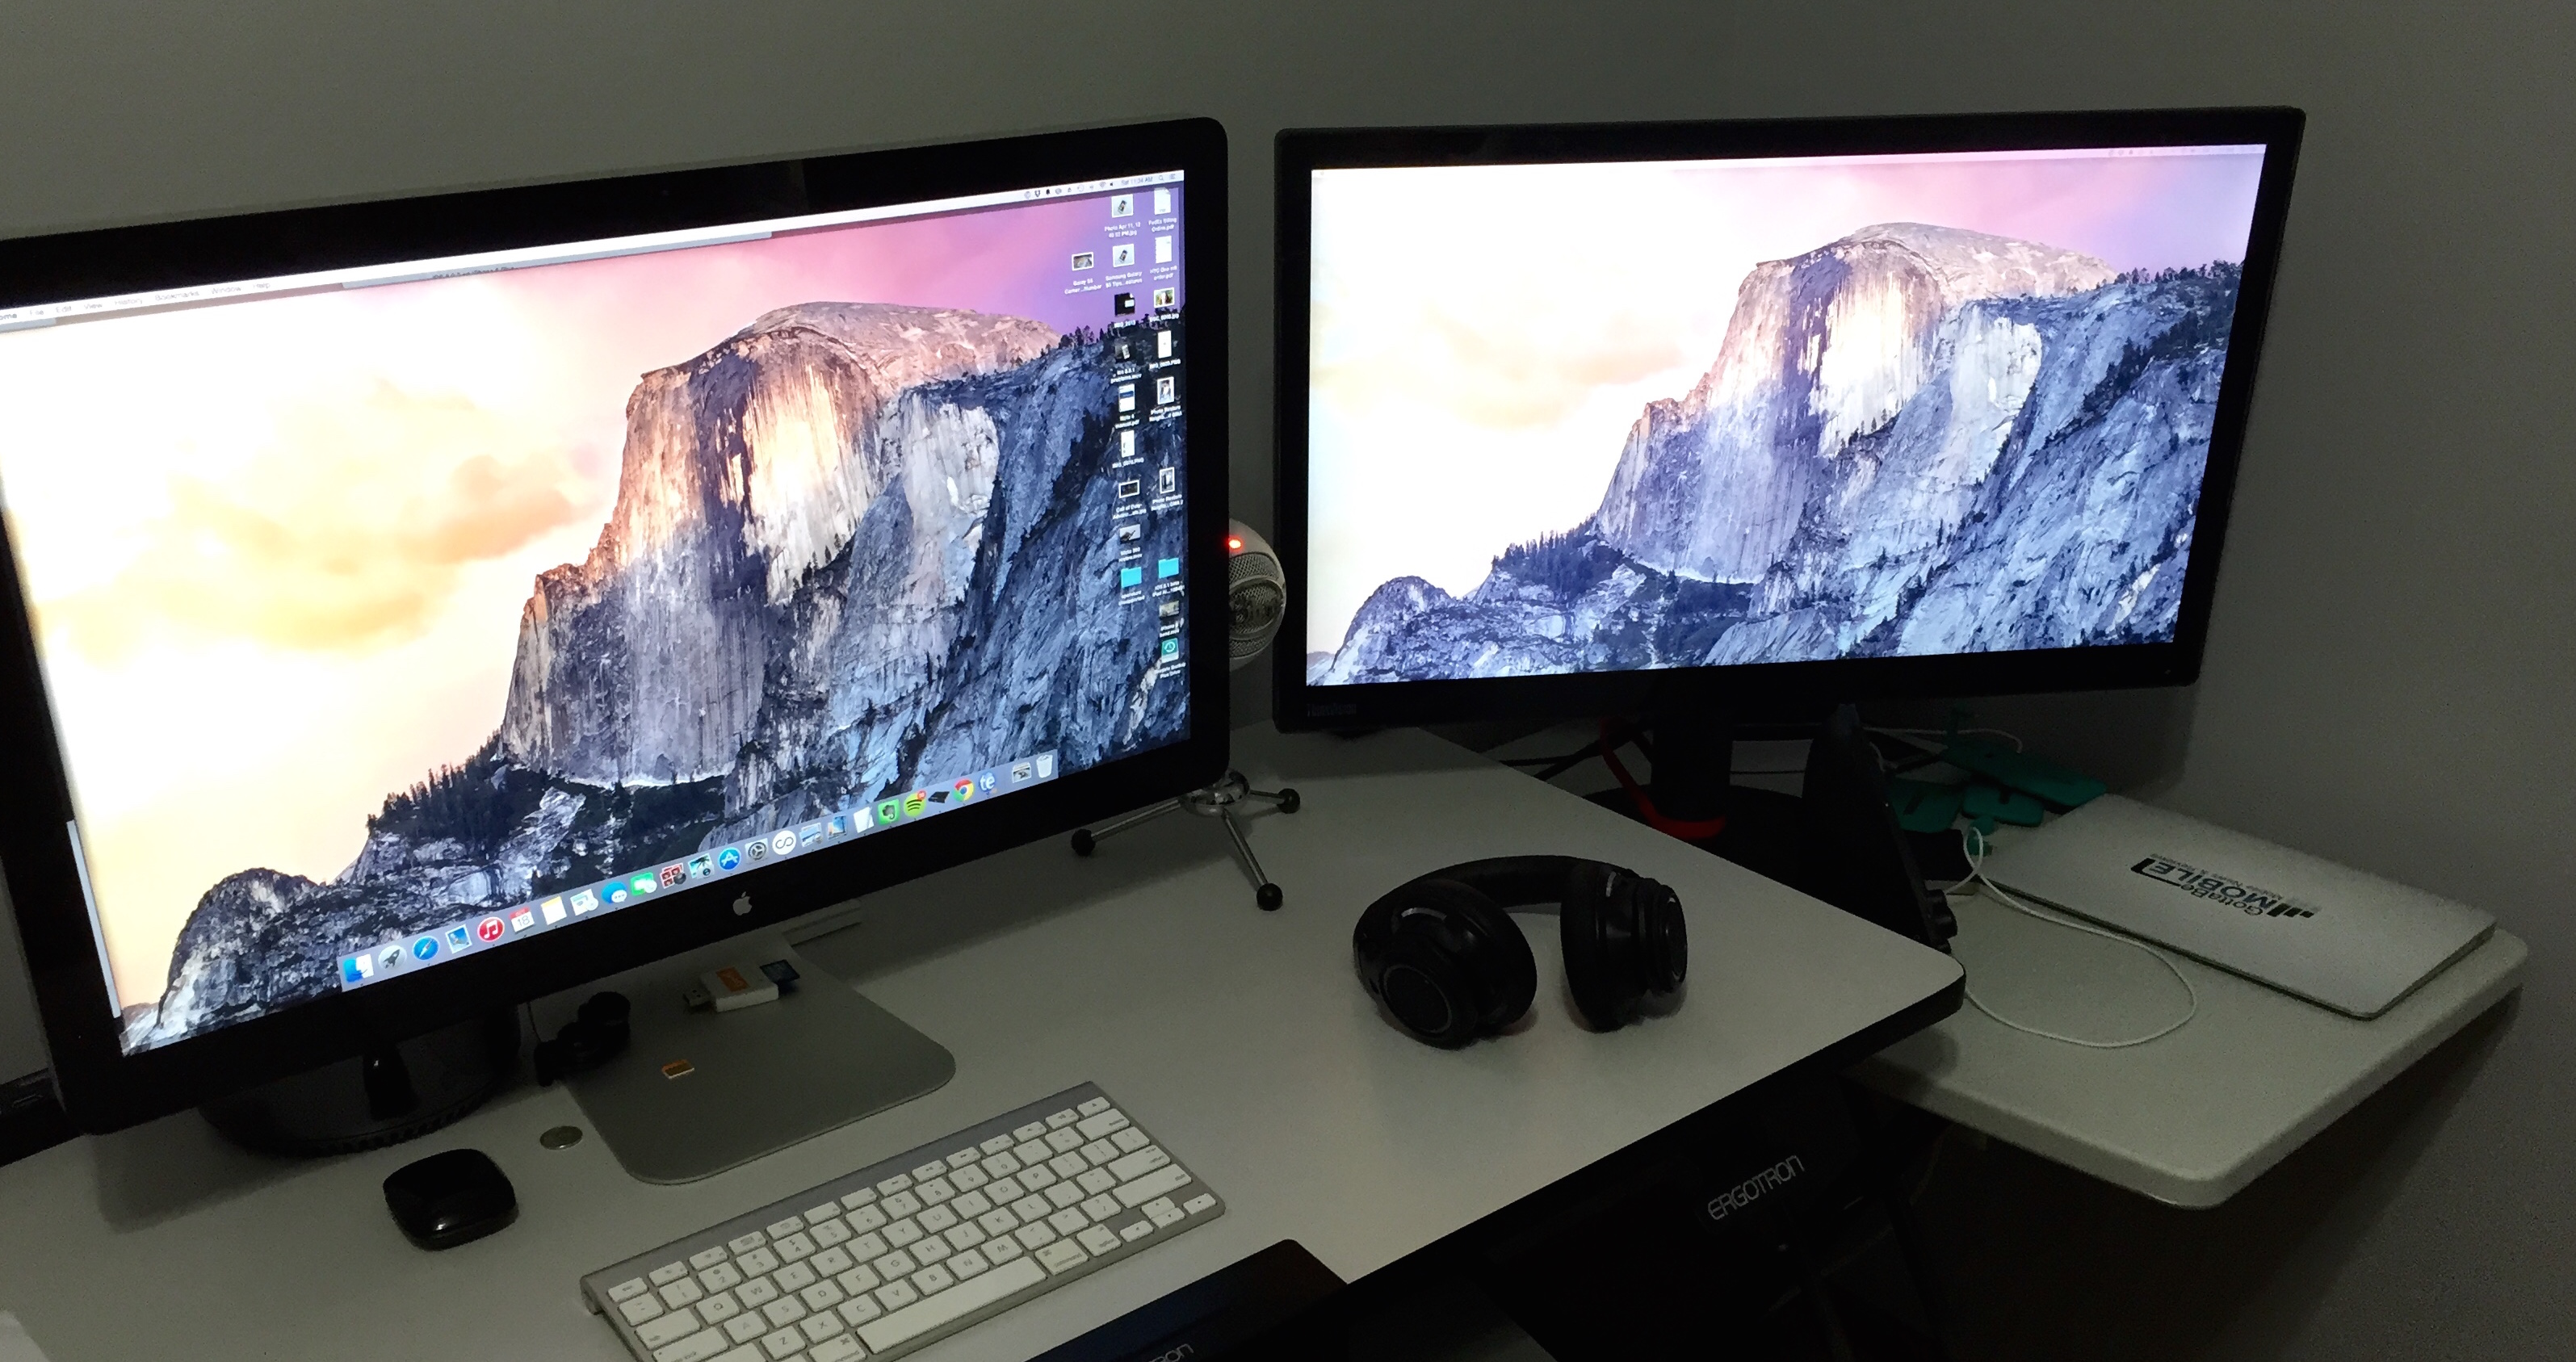 Here are 10 things you need to try when you install OS X Yosemite.